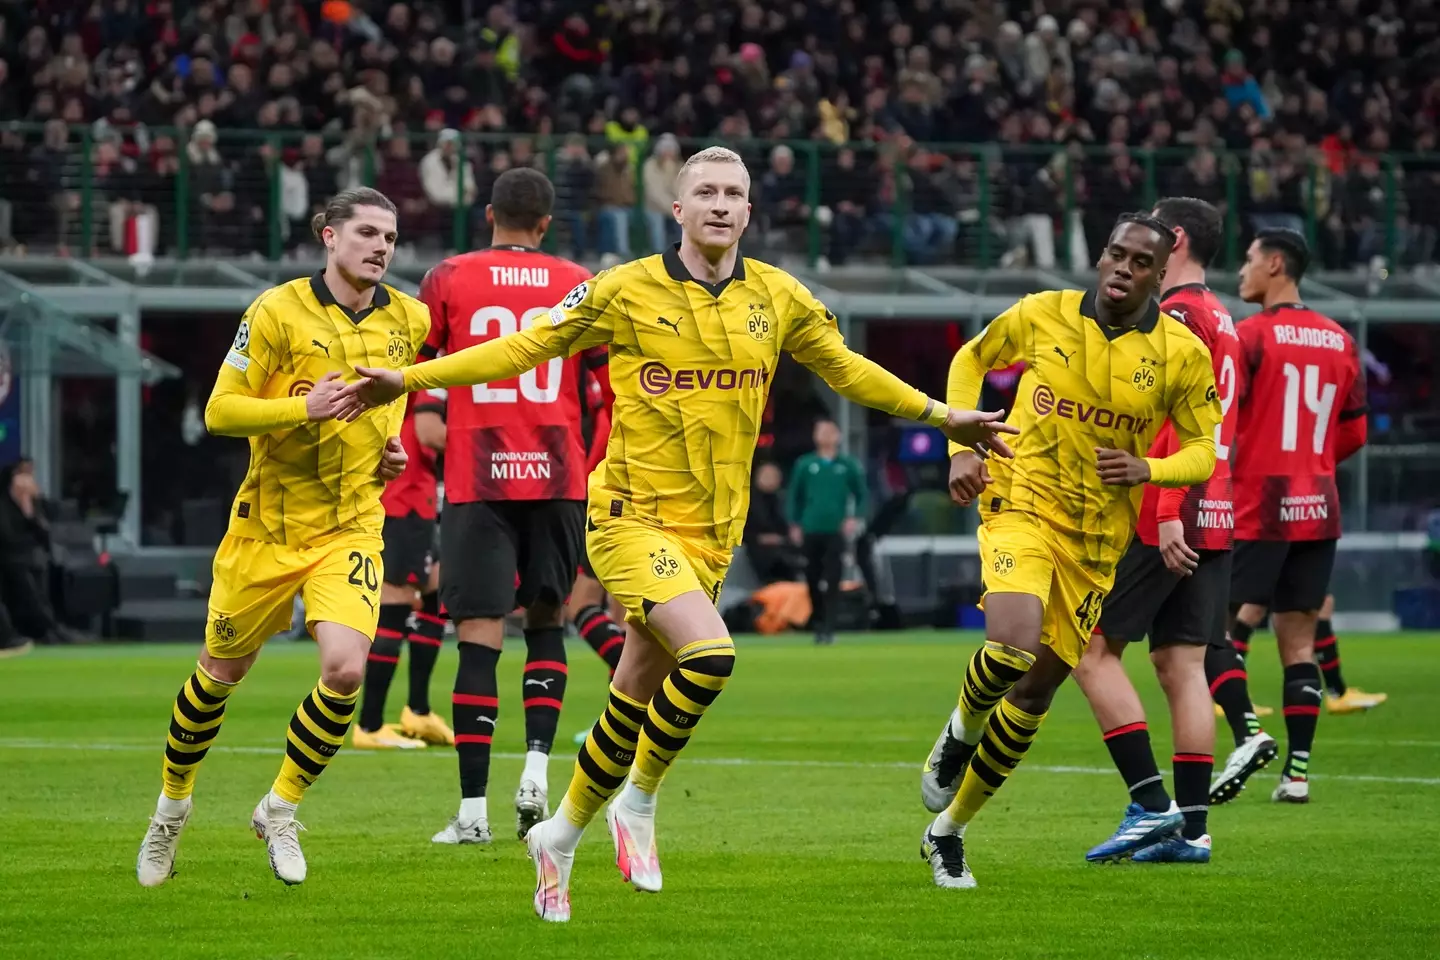 Marco Reus celebrates with his teammates after putting Dortmund ahead. (Image